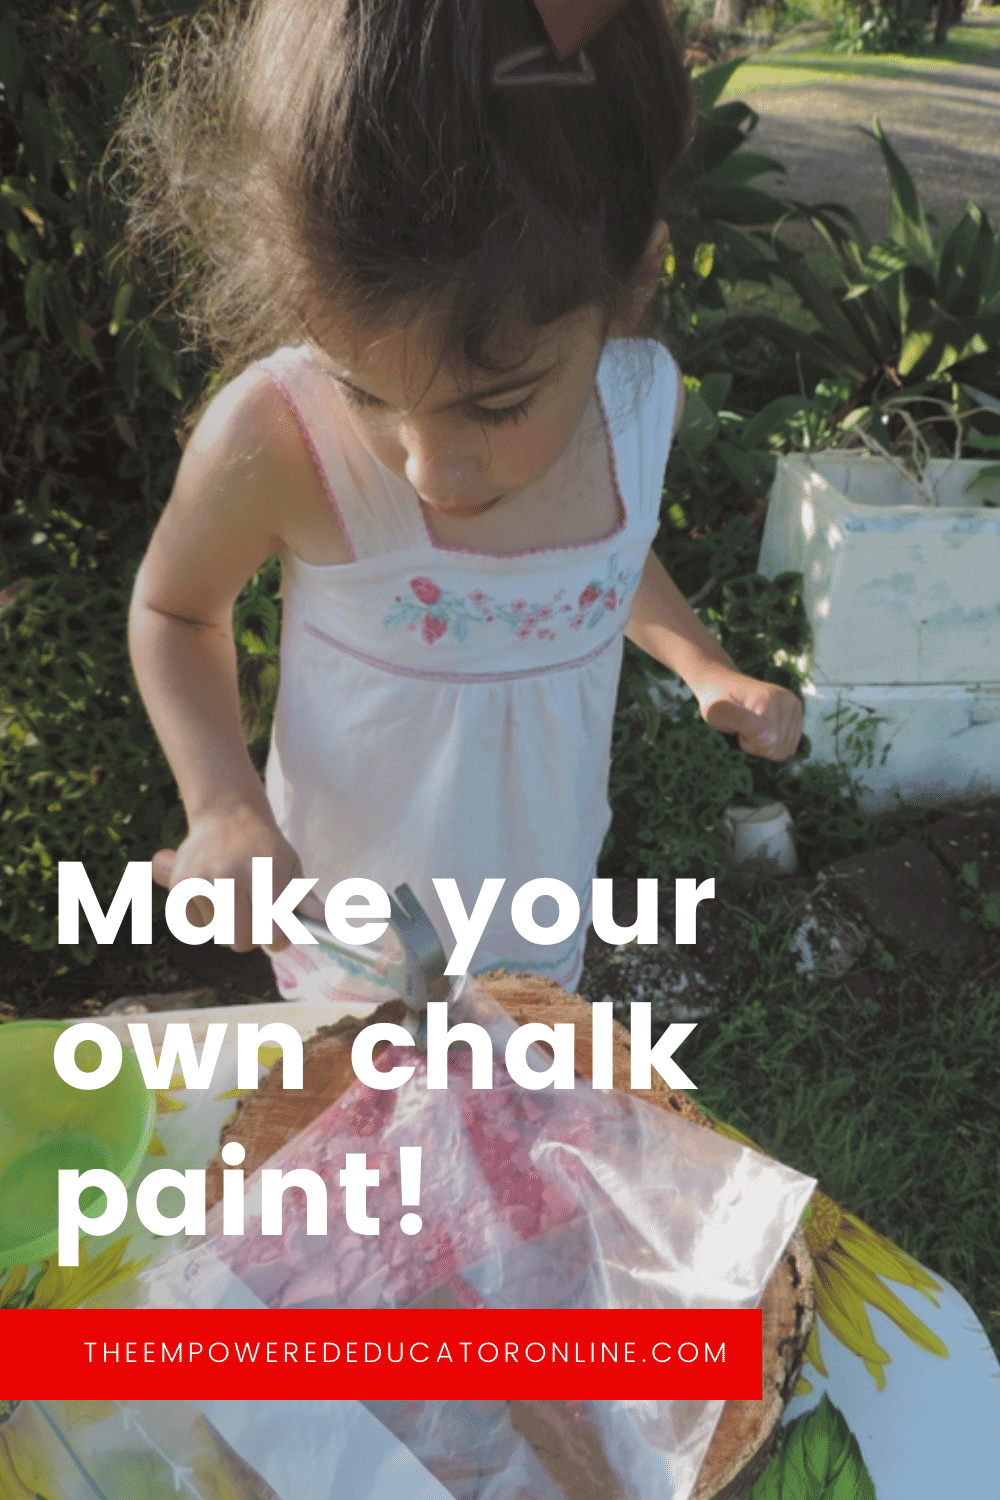 Make your own chalk paint!